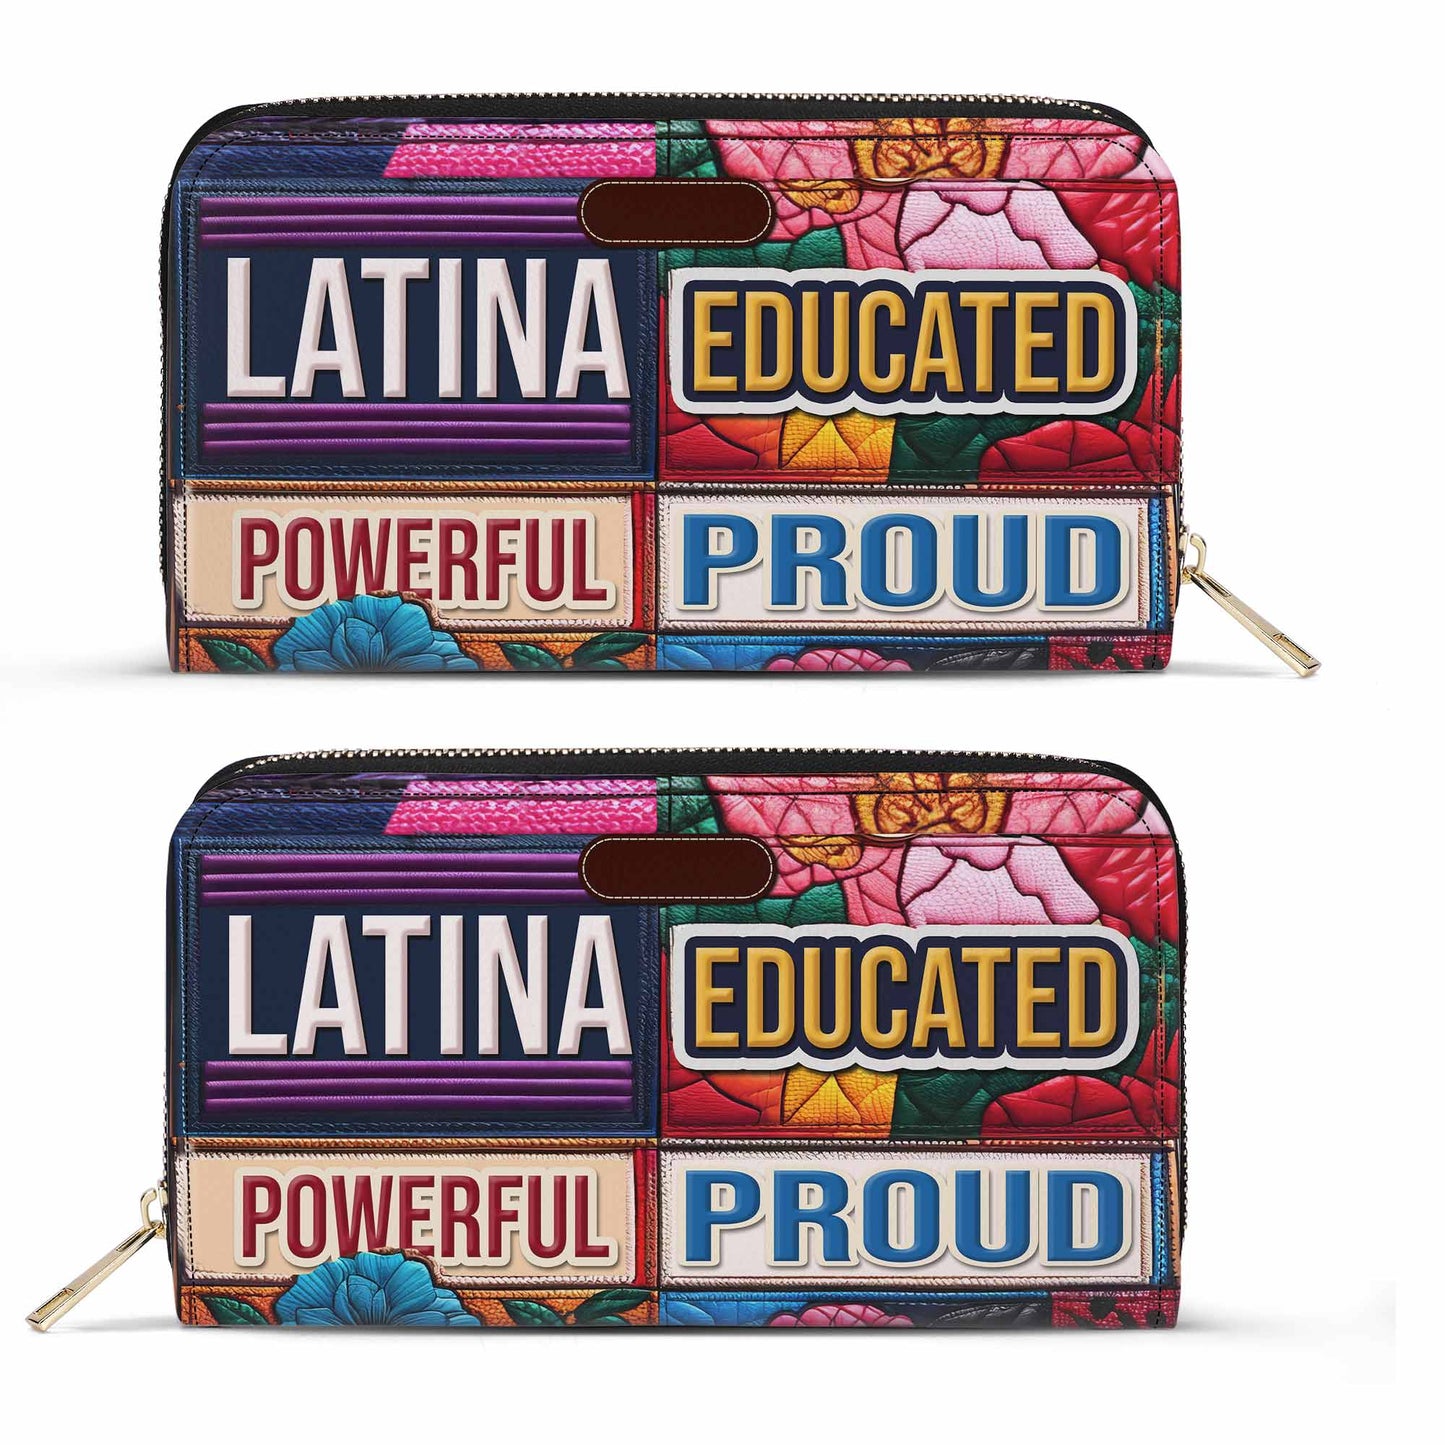 Educated Powerful Proud - Leather Wallet - HG29WL